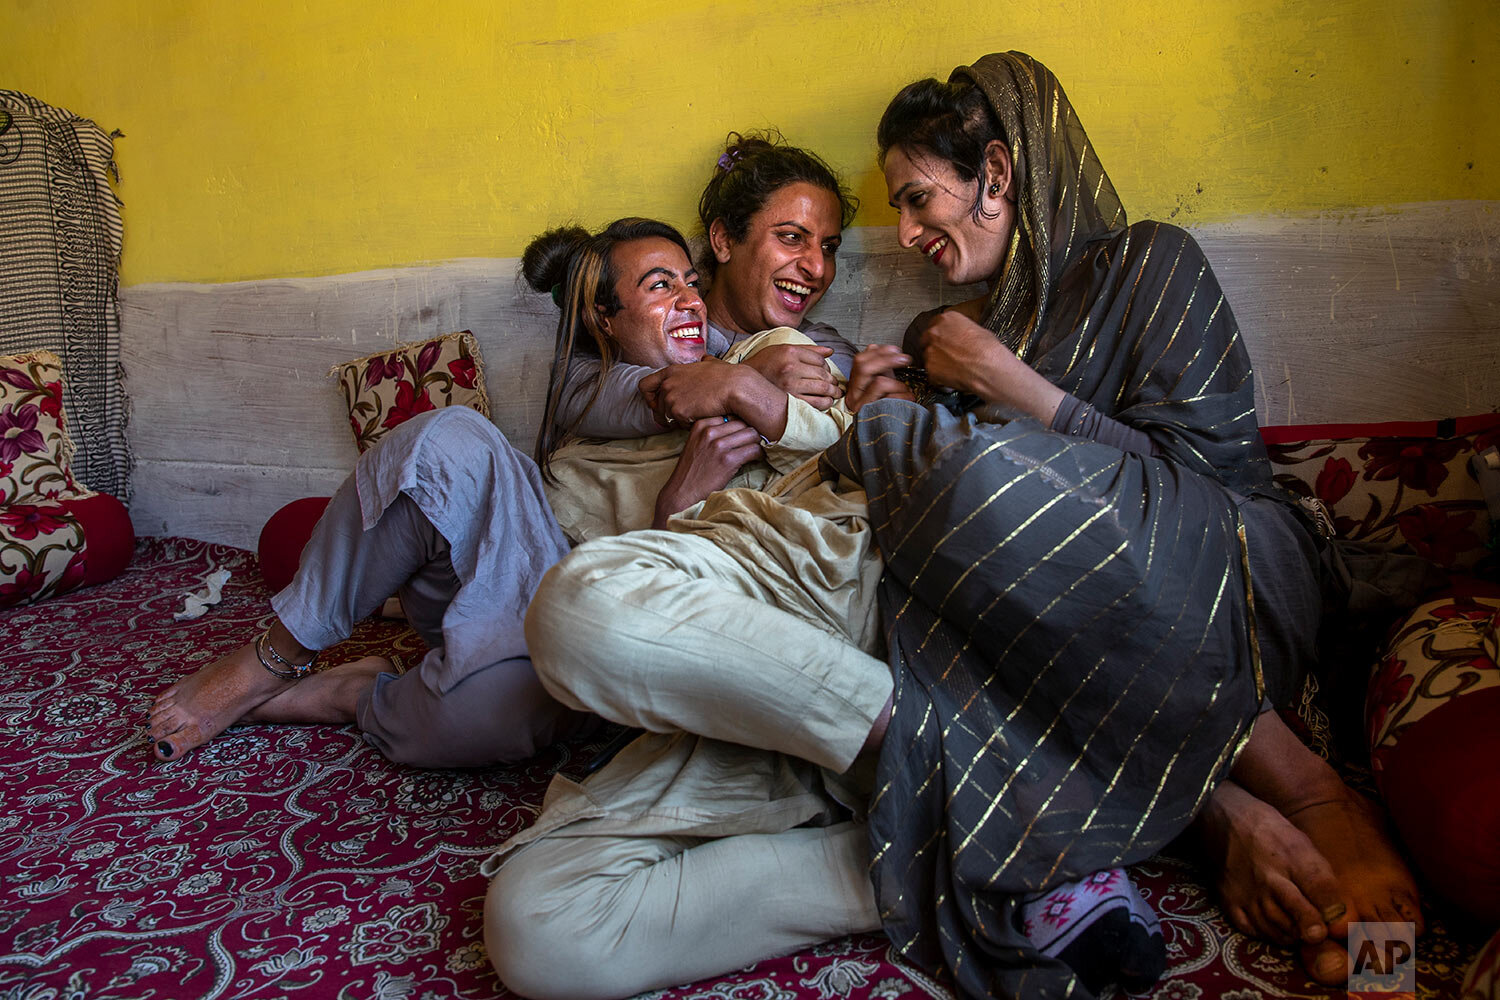  Khushi Mir, left, a transgender Kashmiri, relaxes with friends at the end of a meeting of community members in the outskirts of Srinagar, Indian controlled Kashmir, Friday, June 4, 2021. (AP Photo/ Dar Yasin) 